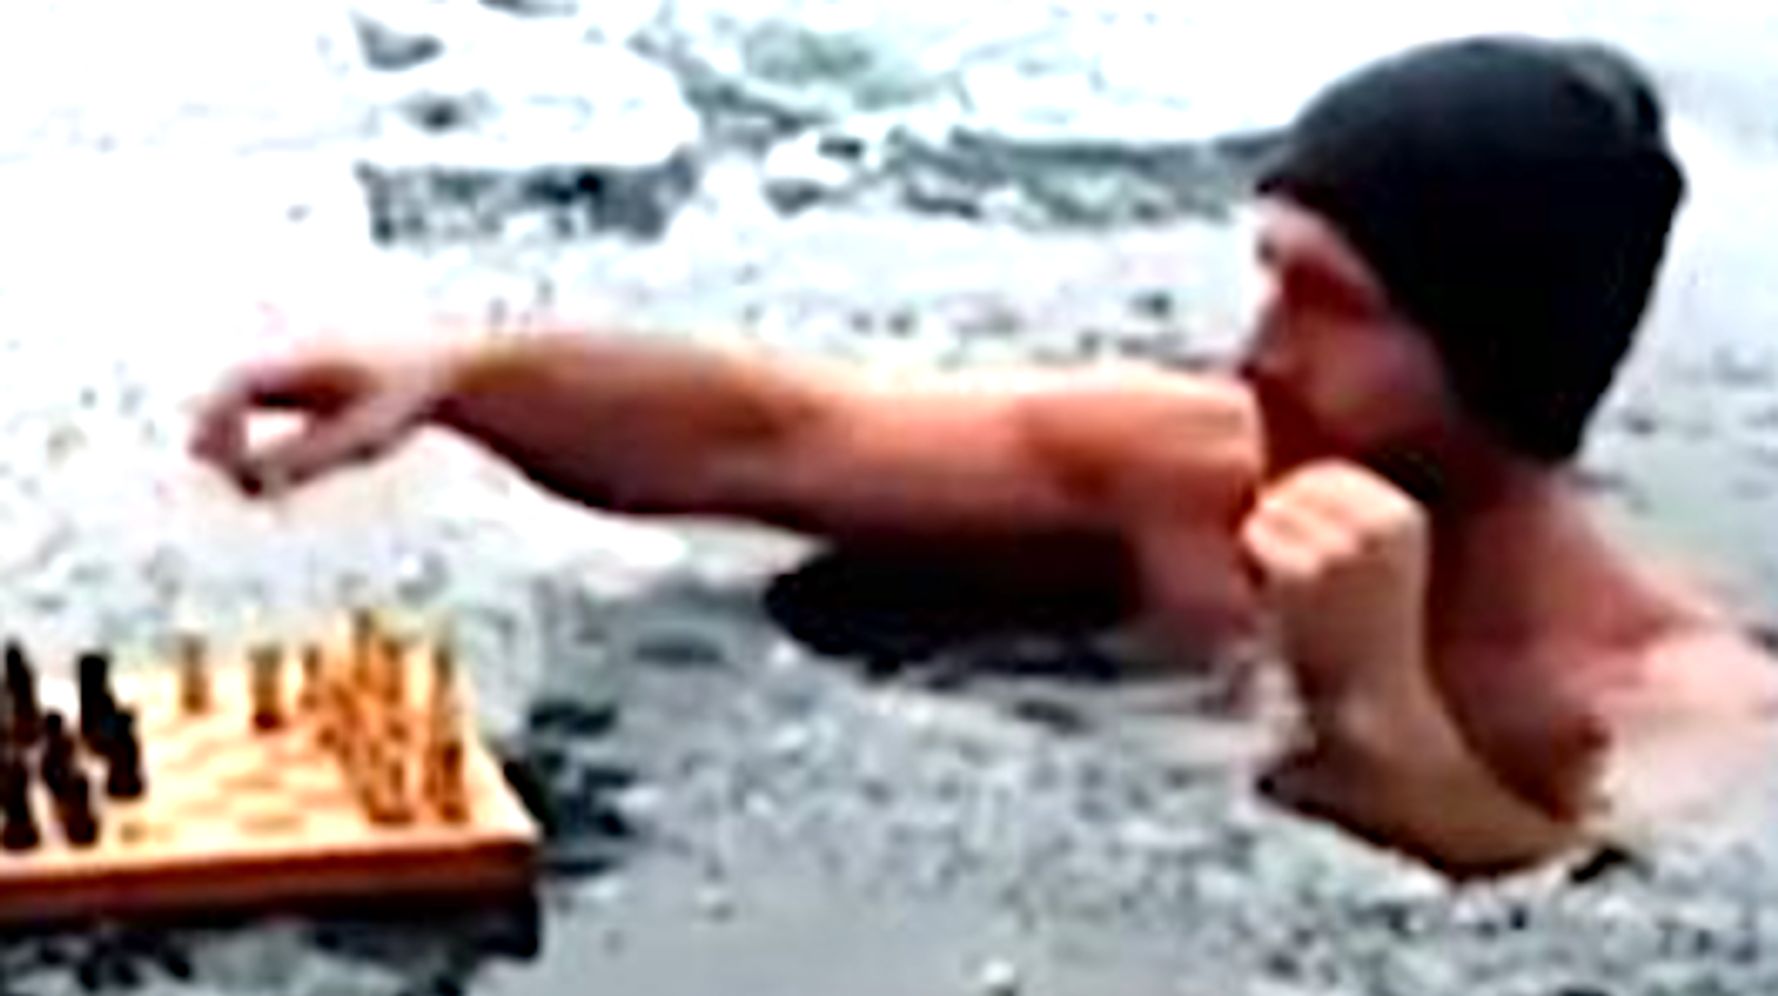 Two zoomers play the old game of chess 